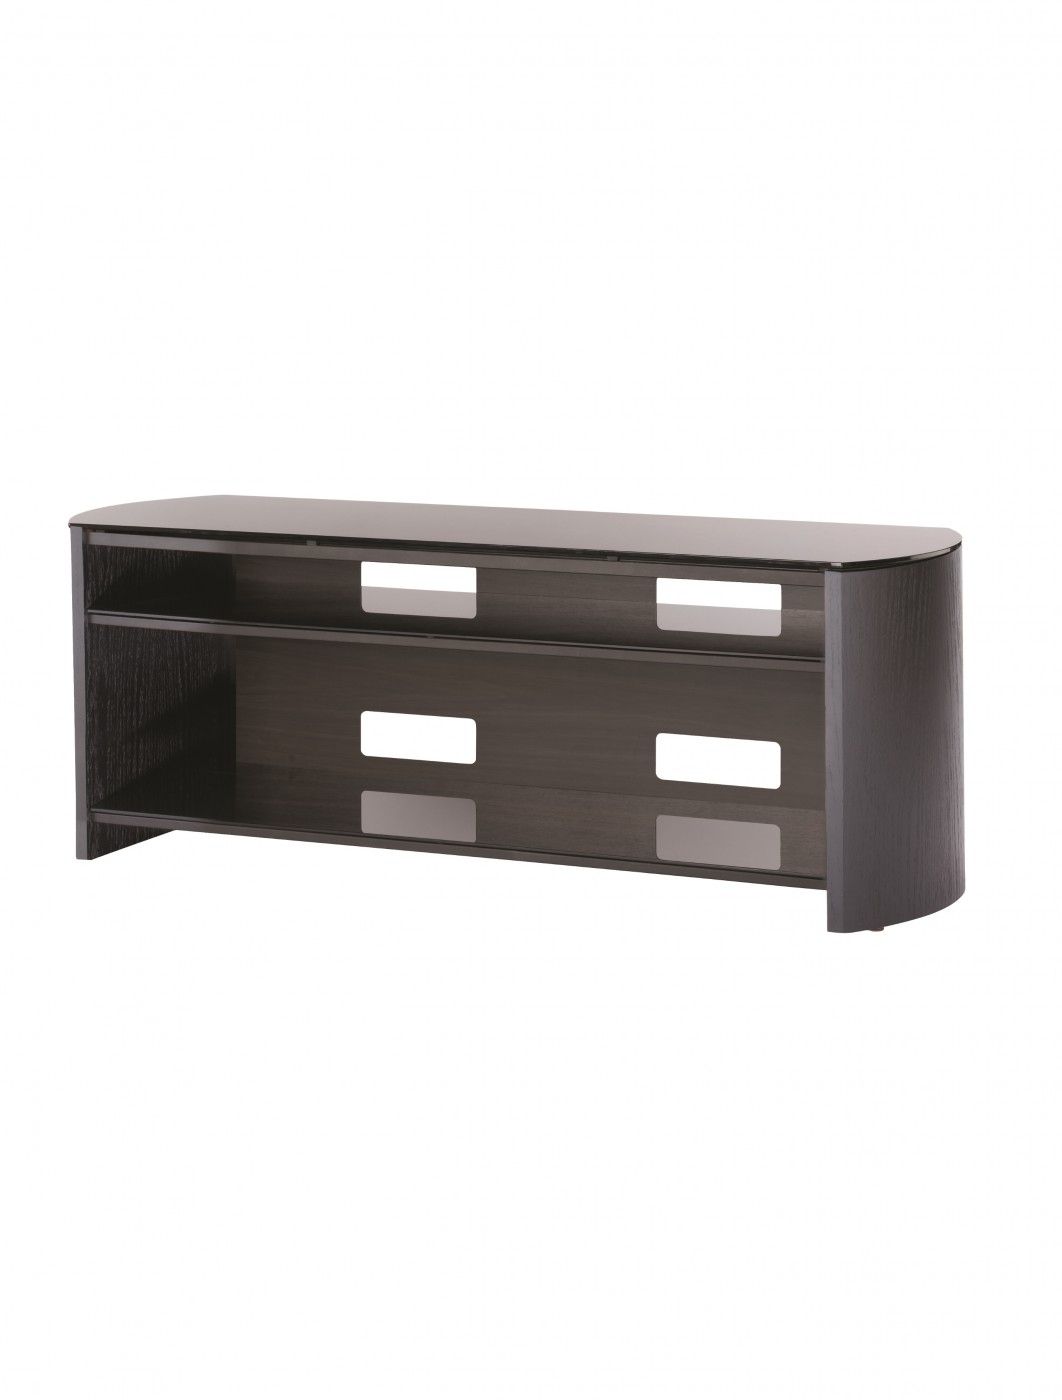 Alphason Fw1350 Bv/b Finewoods Tv Stand | 121 Tv Mounts Throughout Alphason Tv Cabinet (View 13 of 15)